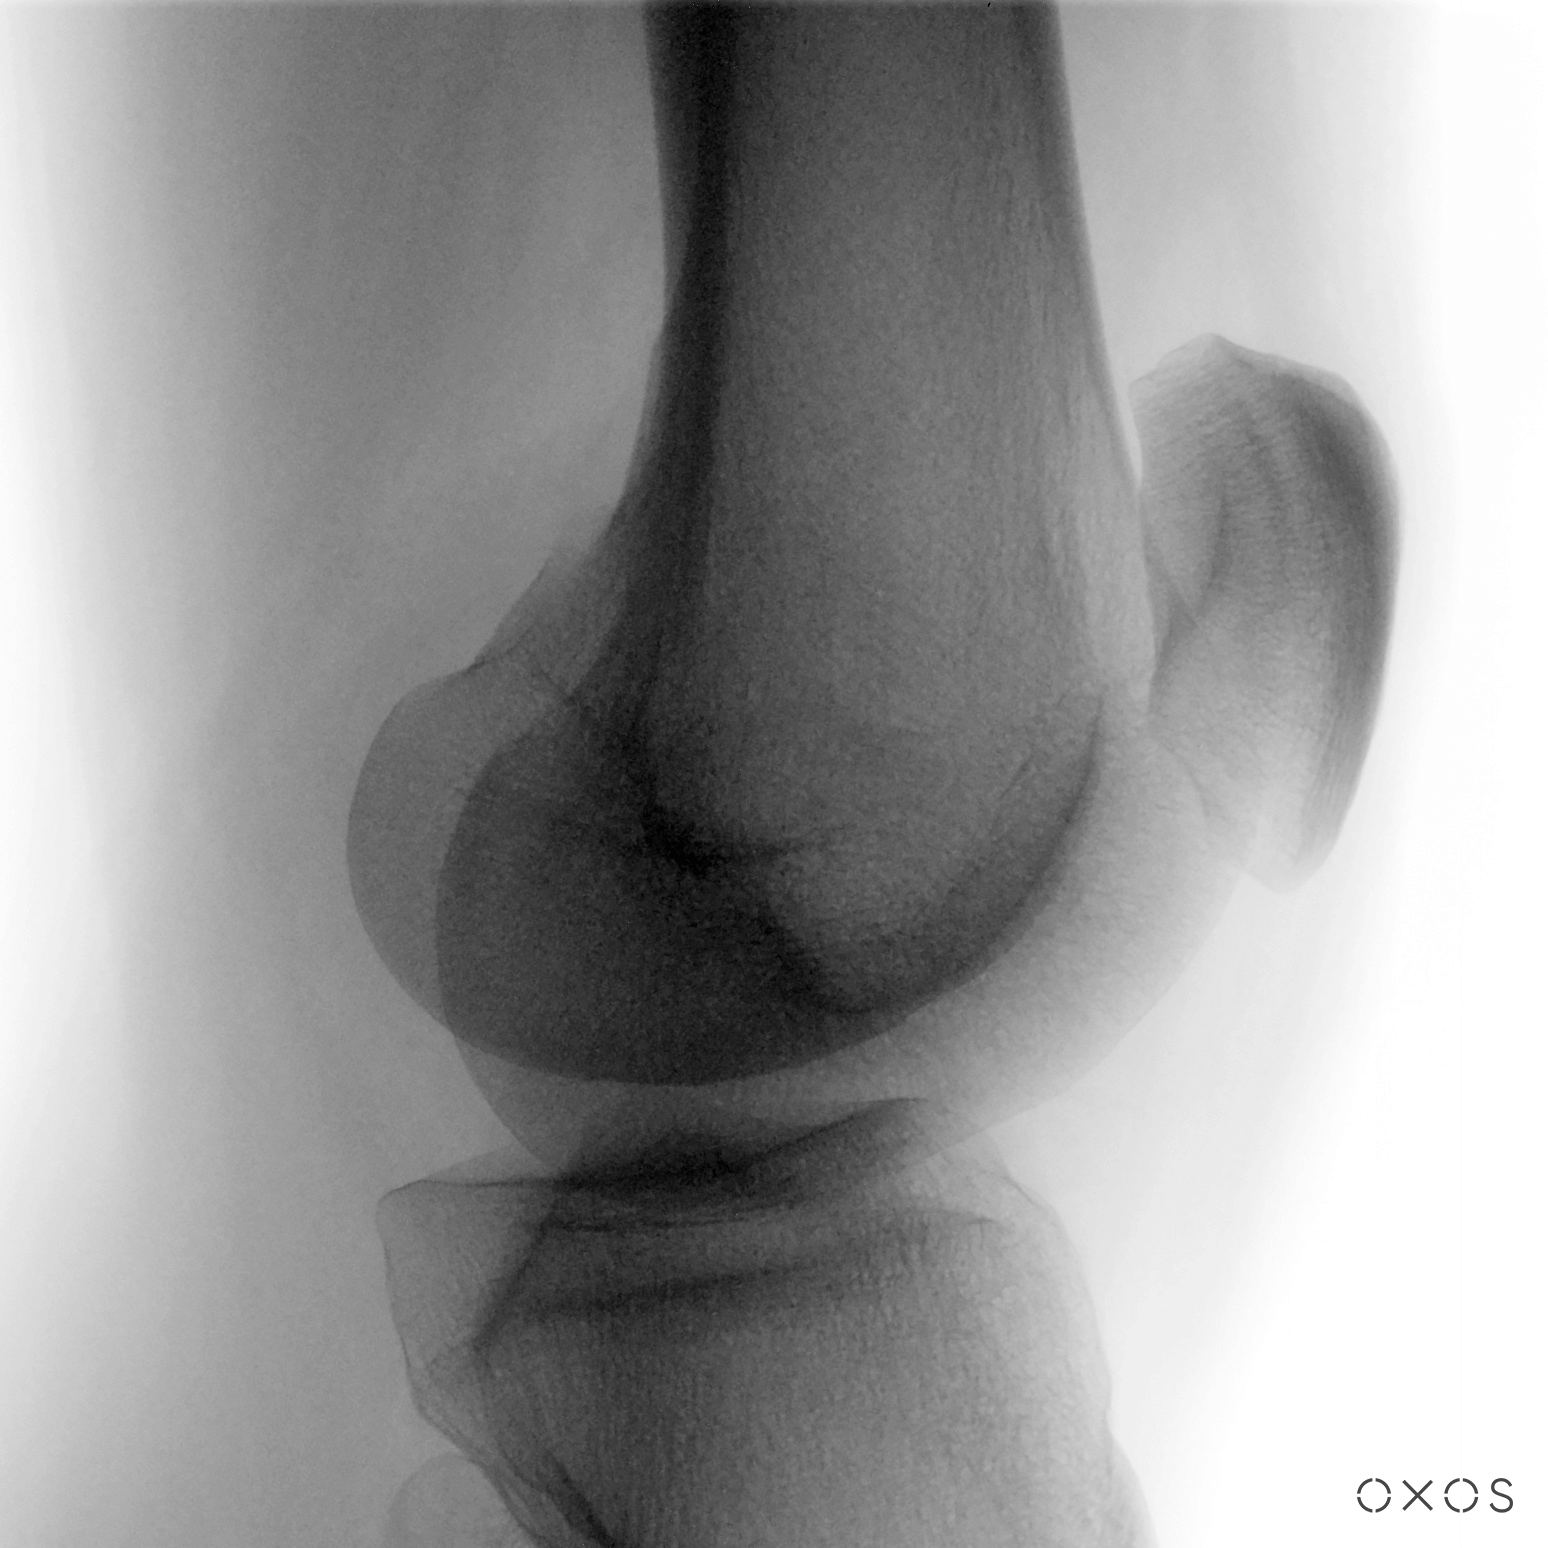 Knee Lateral, 6.8 µGy